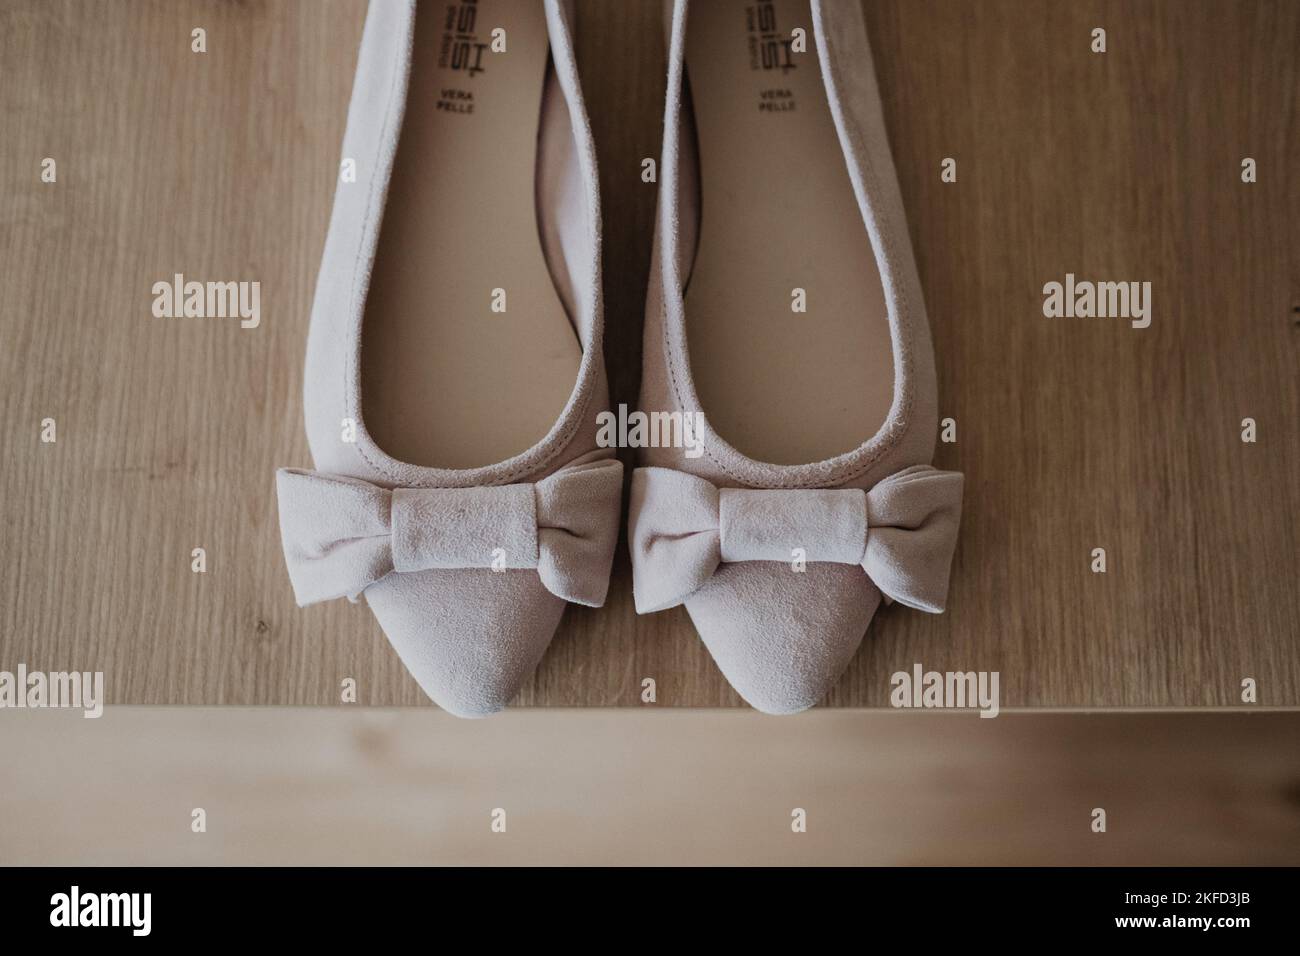 A top view of a pair of creamy bridal shoes on the table Stock Photo